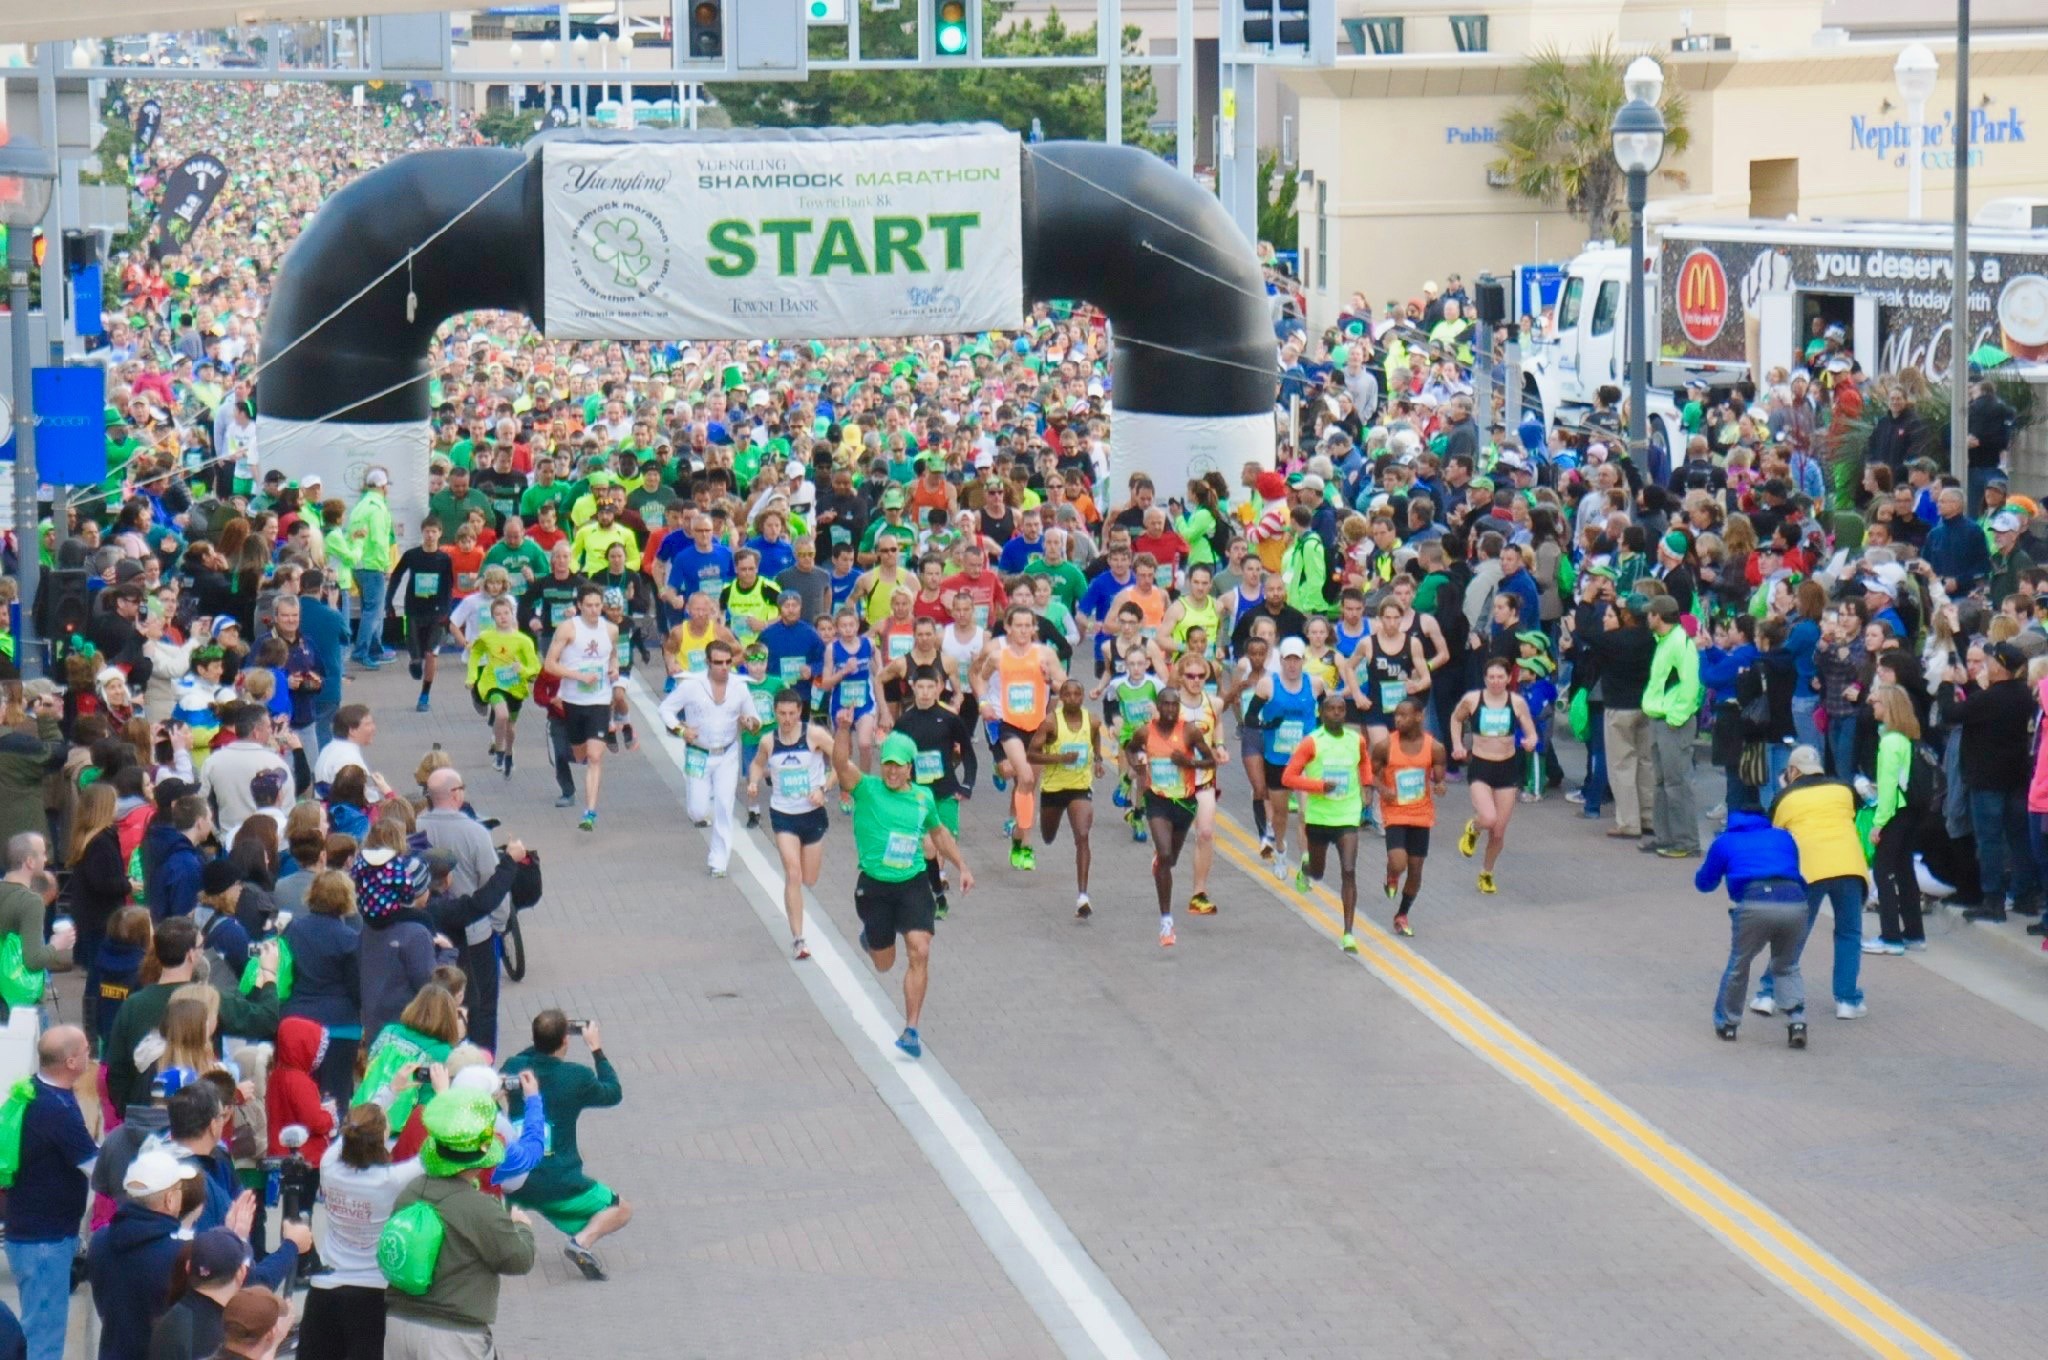 2021 Shamrock Marathon was a success but with most runners